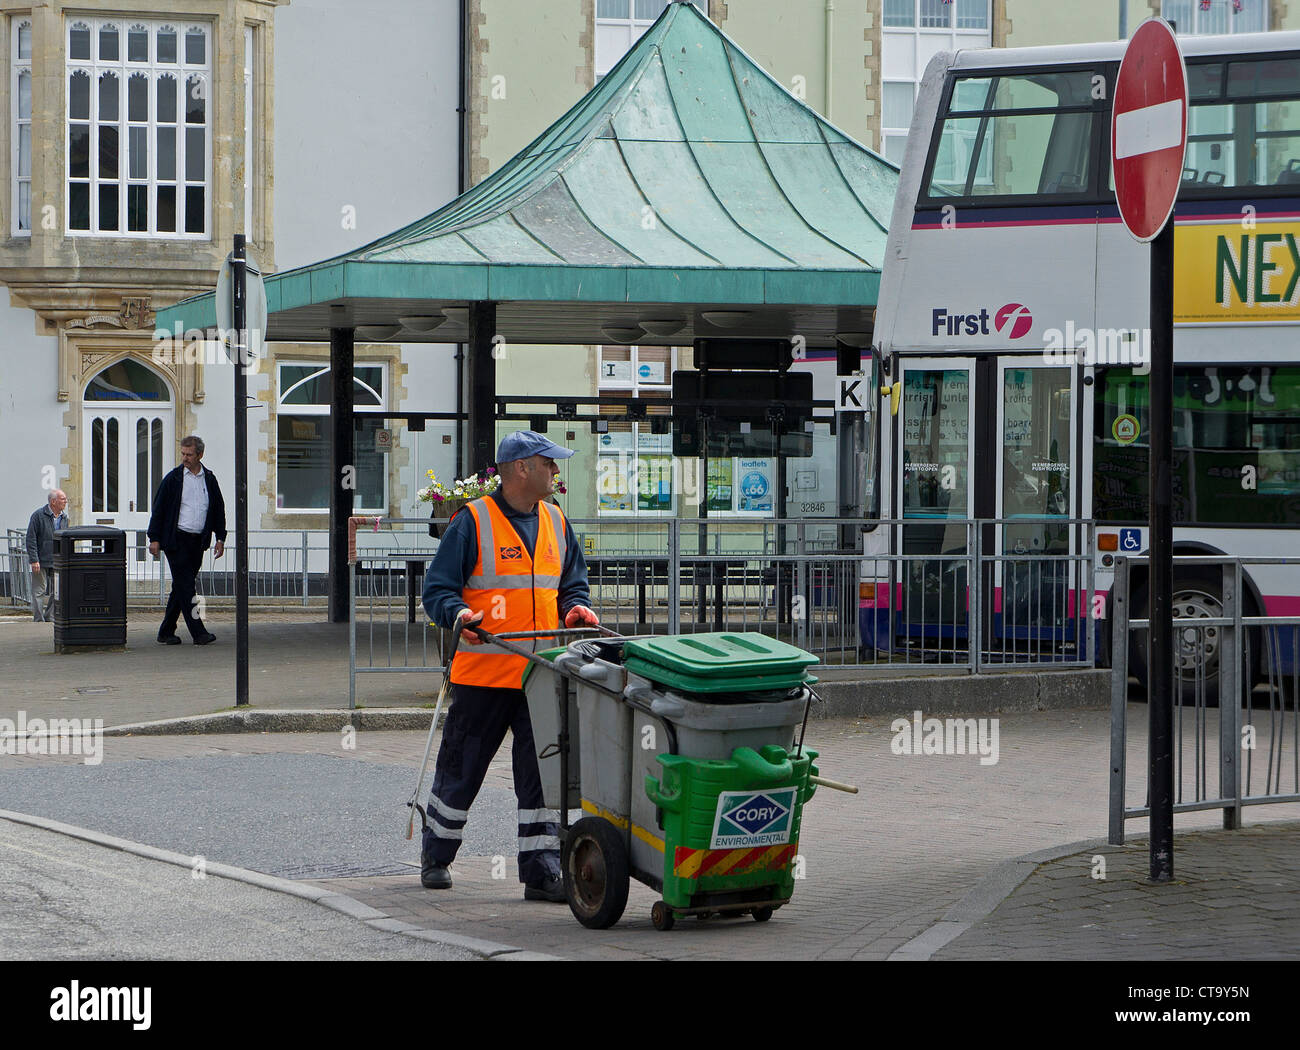 A street cleaner in Truro, Cornwall, UK Stock Photo